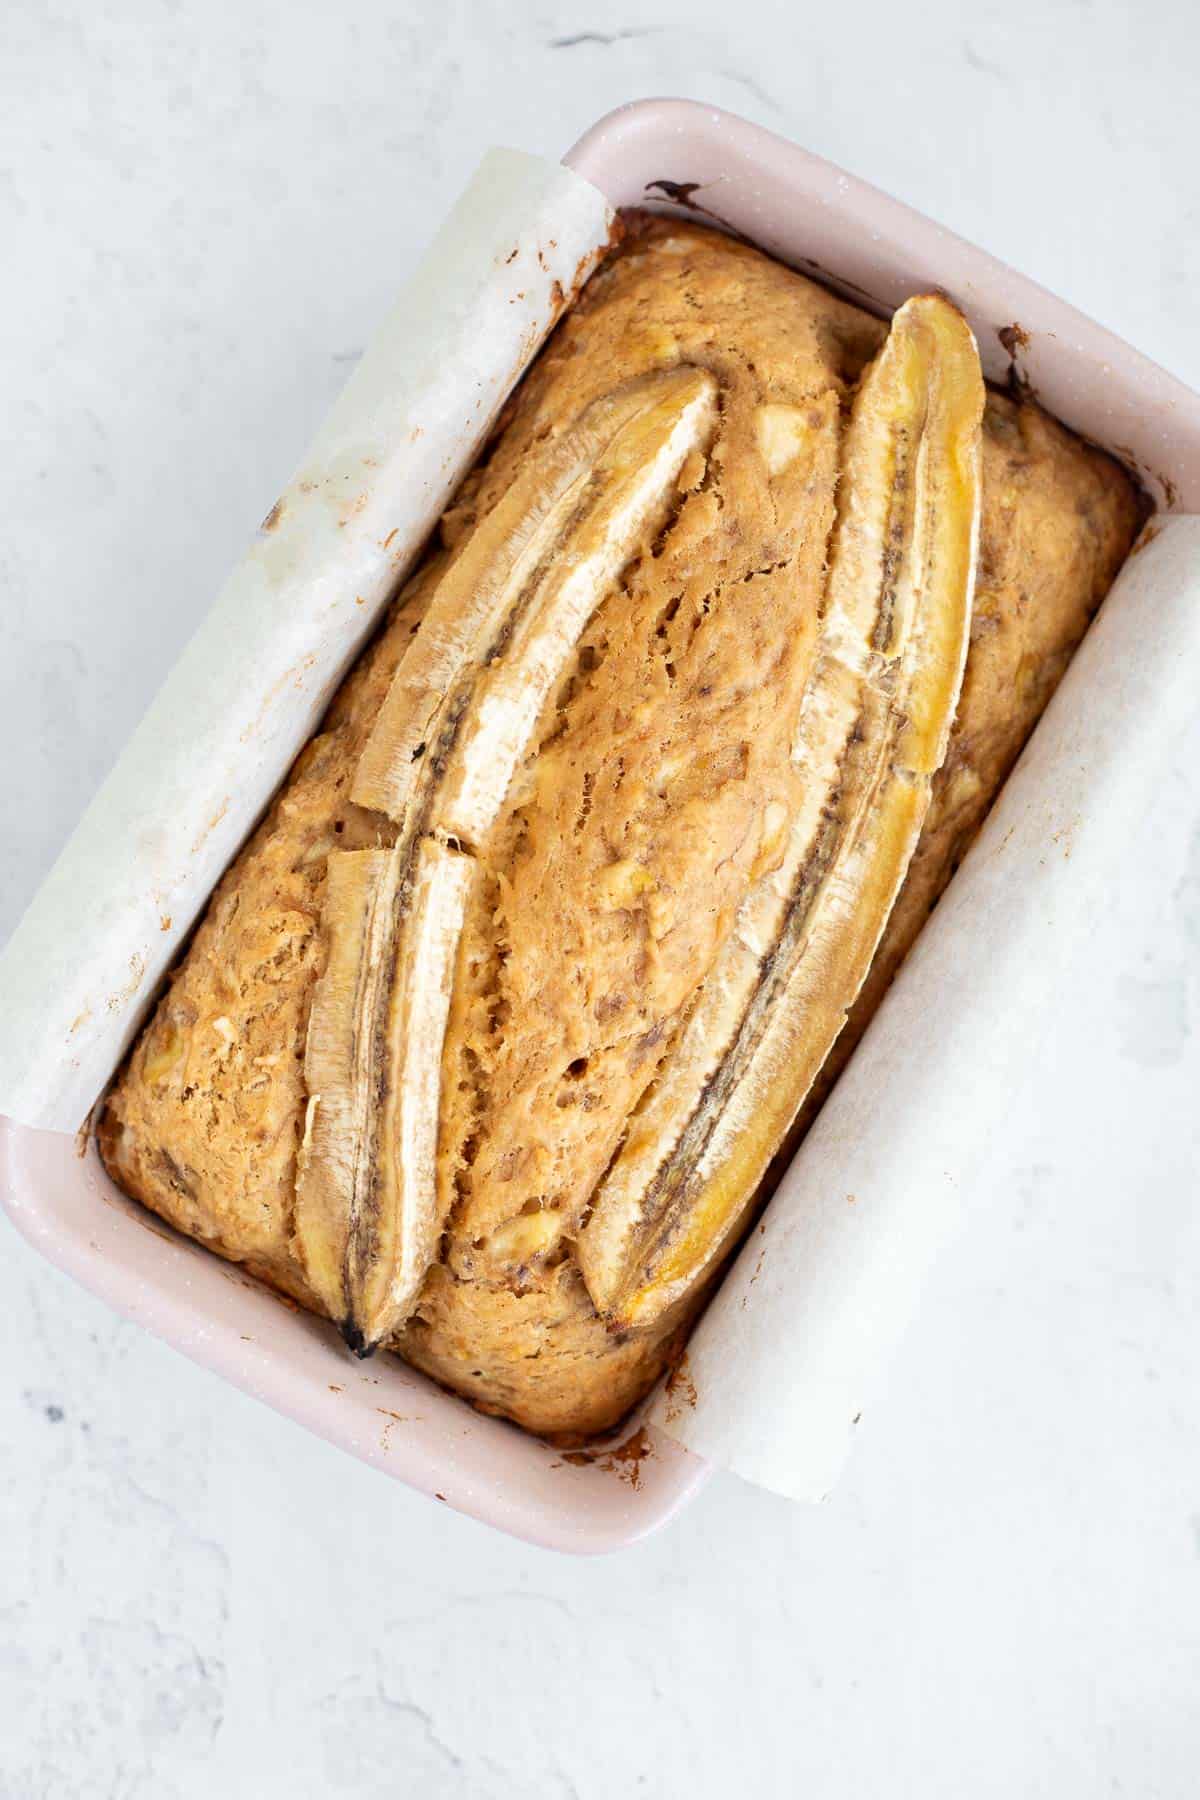 4 ingredient banana bread baked in a pink loaf pan.